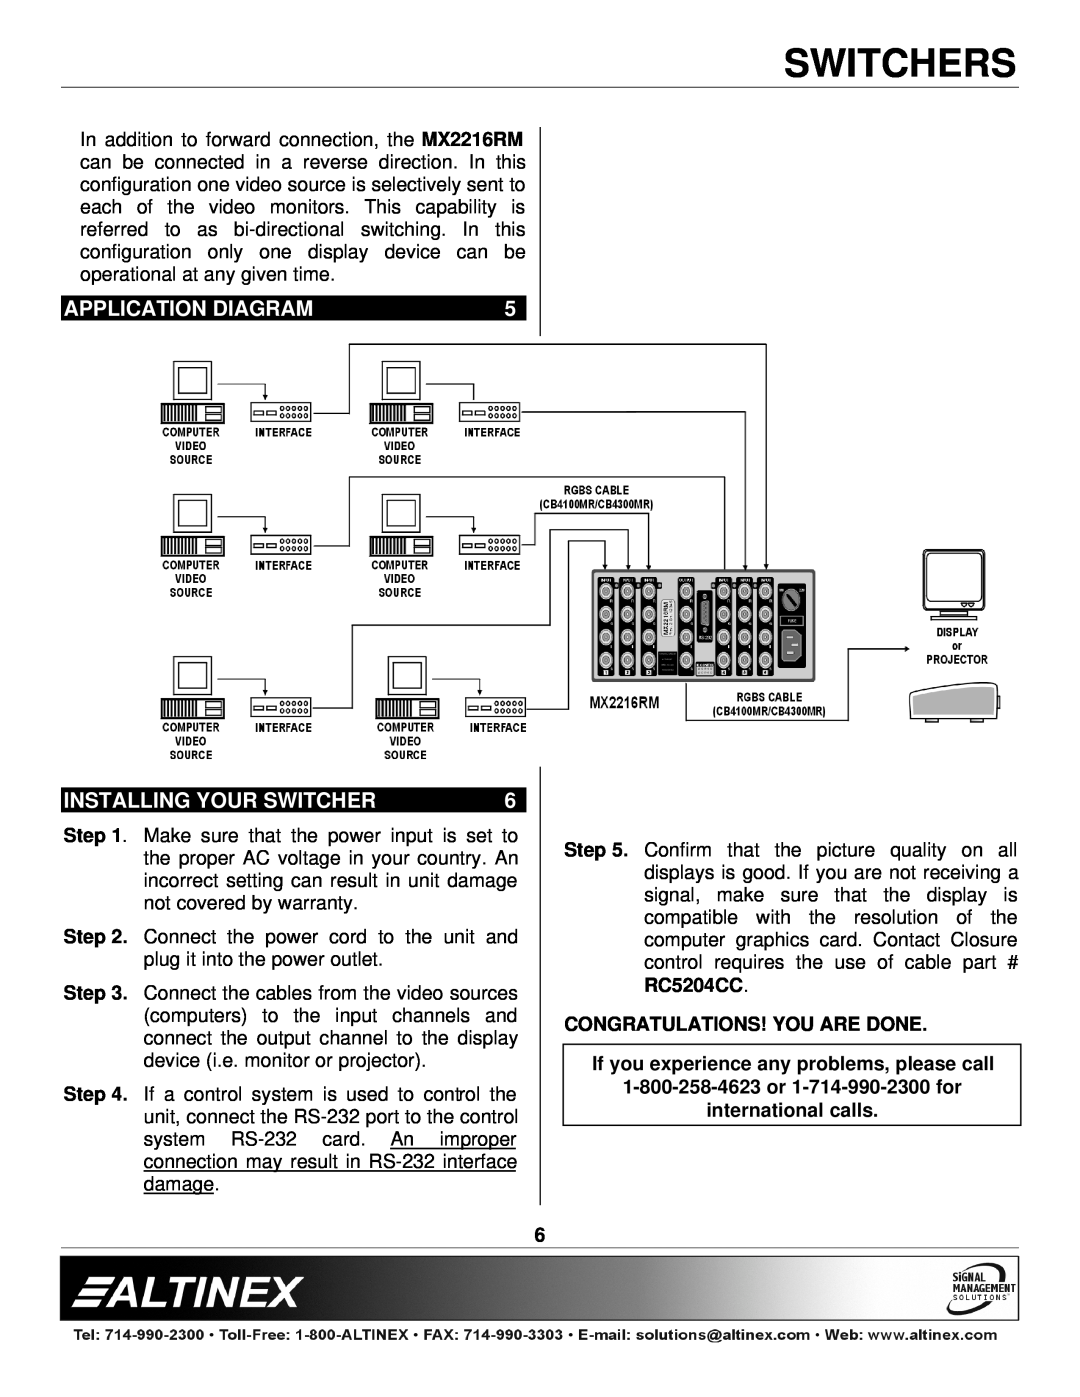 Altinex MX2216RM manual Application Diagram, Installing Your Switcher, Congratulations! You Are Done, Switchers 